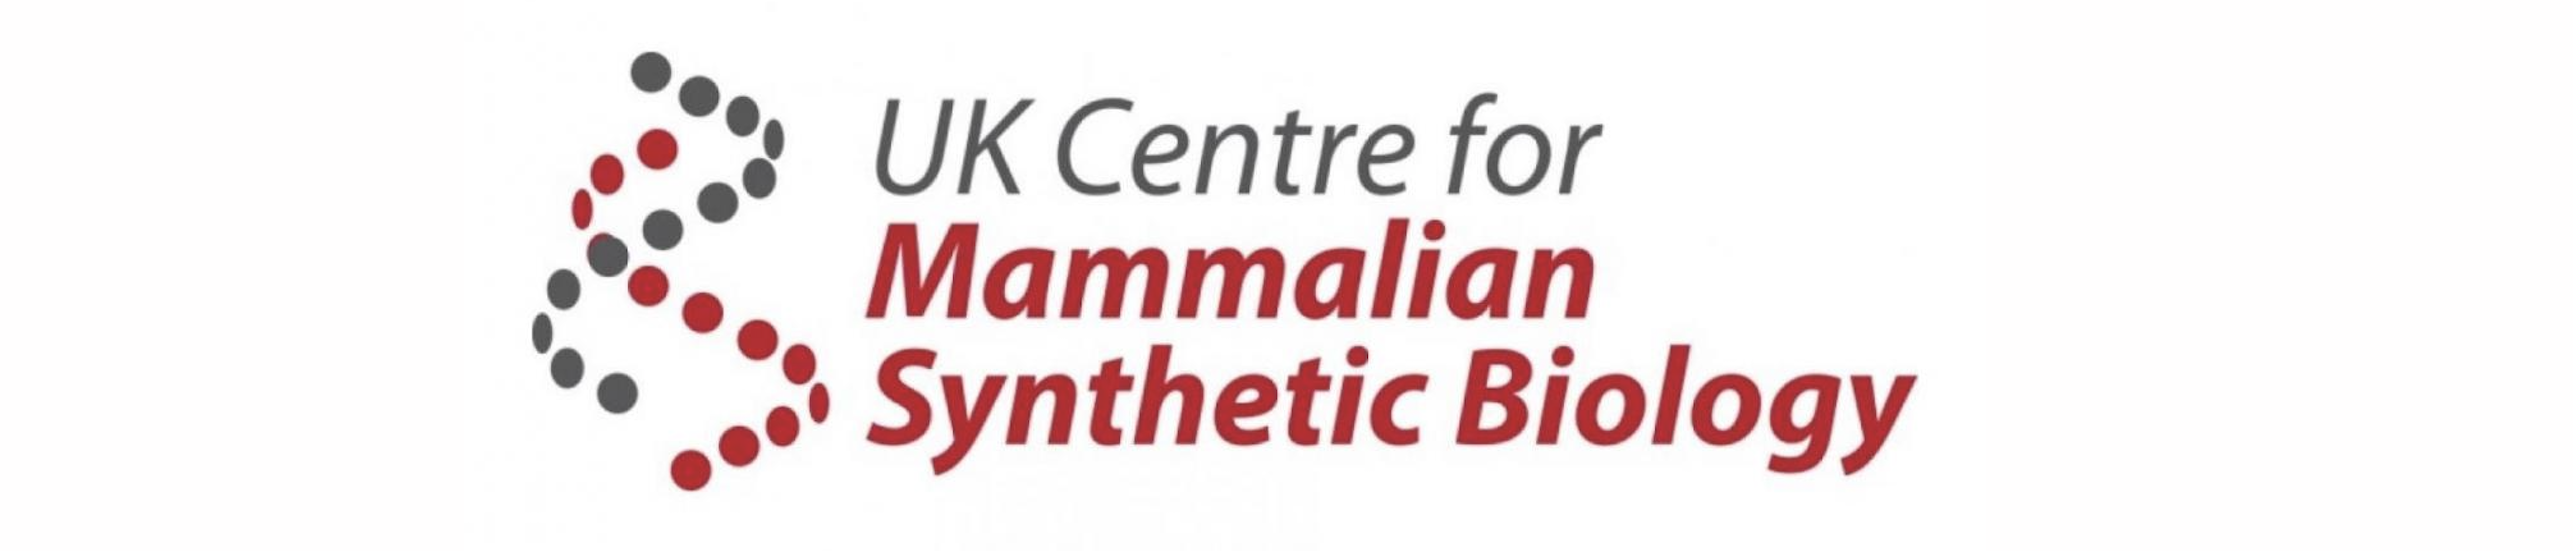 UK Centre for Mammalian Synthetic Biology Banner